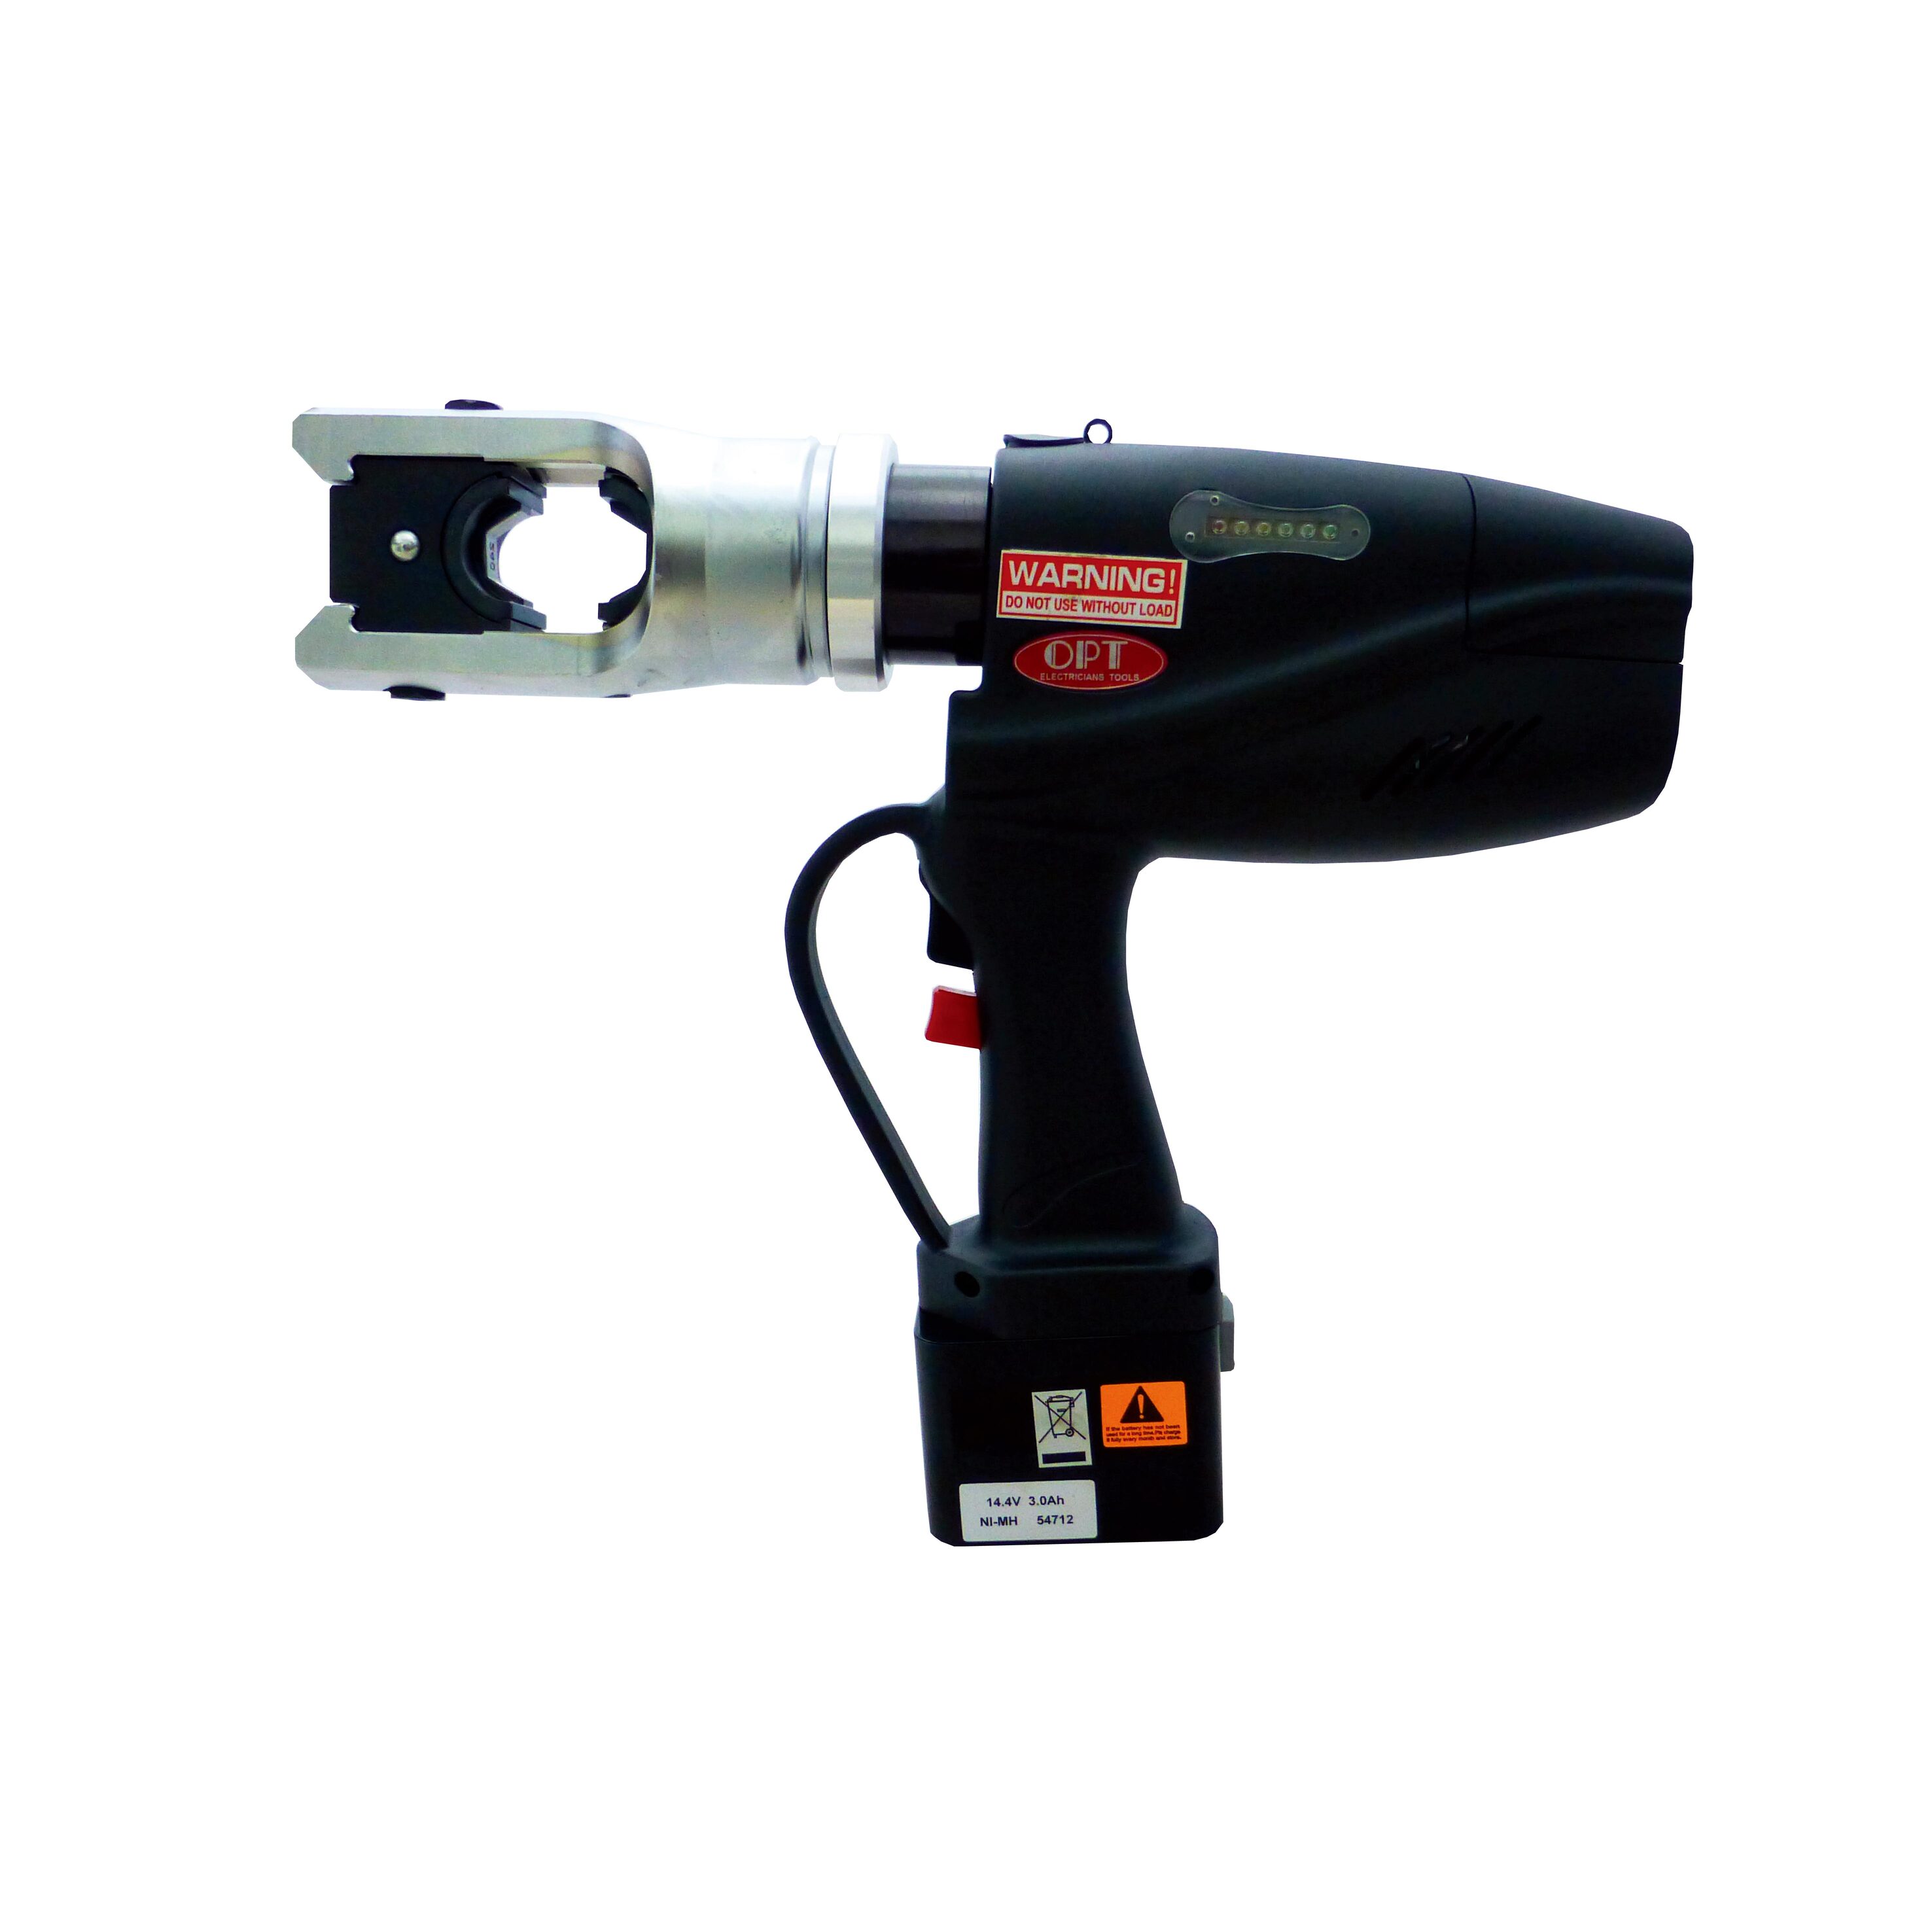 EPL-4131 CORDLESS HYDRAULIC CRIMPING TOOLS-EPL-4131